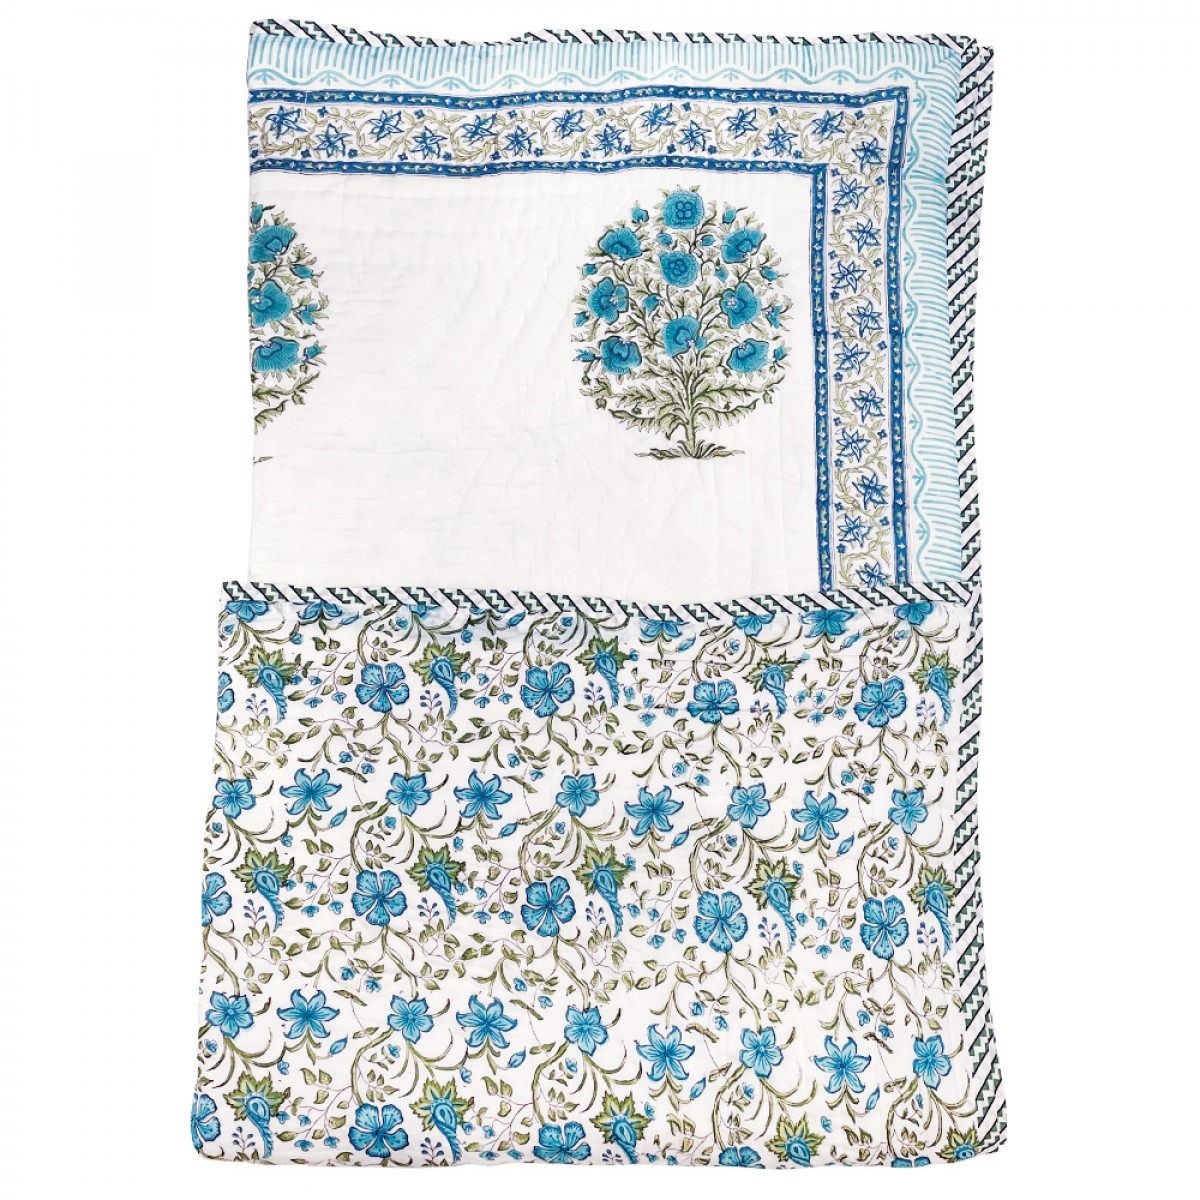 100% Cotton Block Printed King Size Quilts - Turquoise Flower